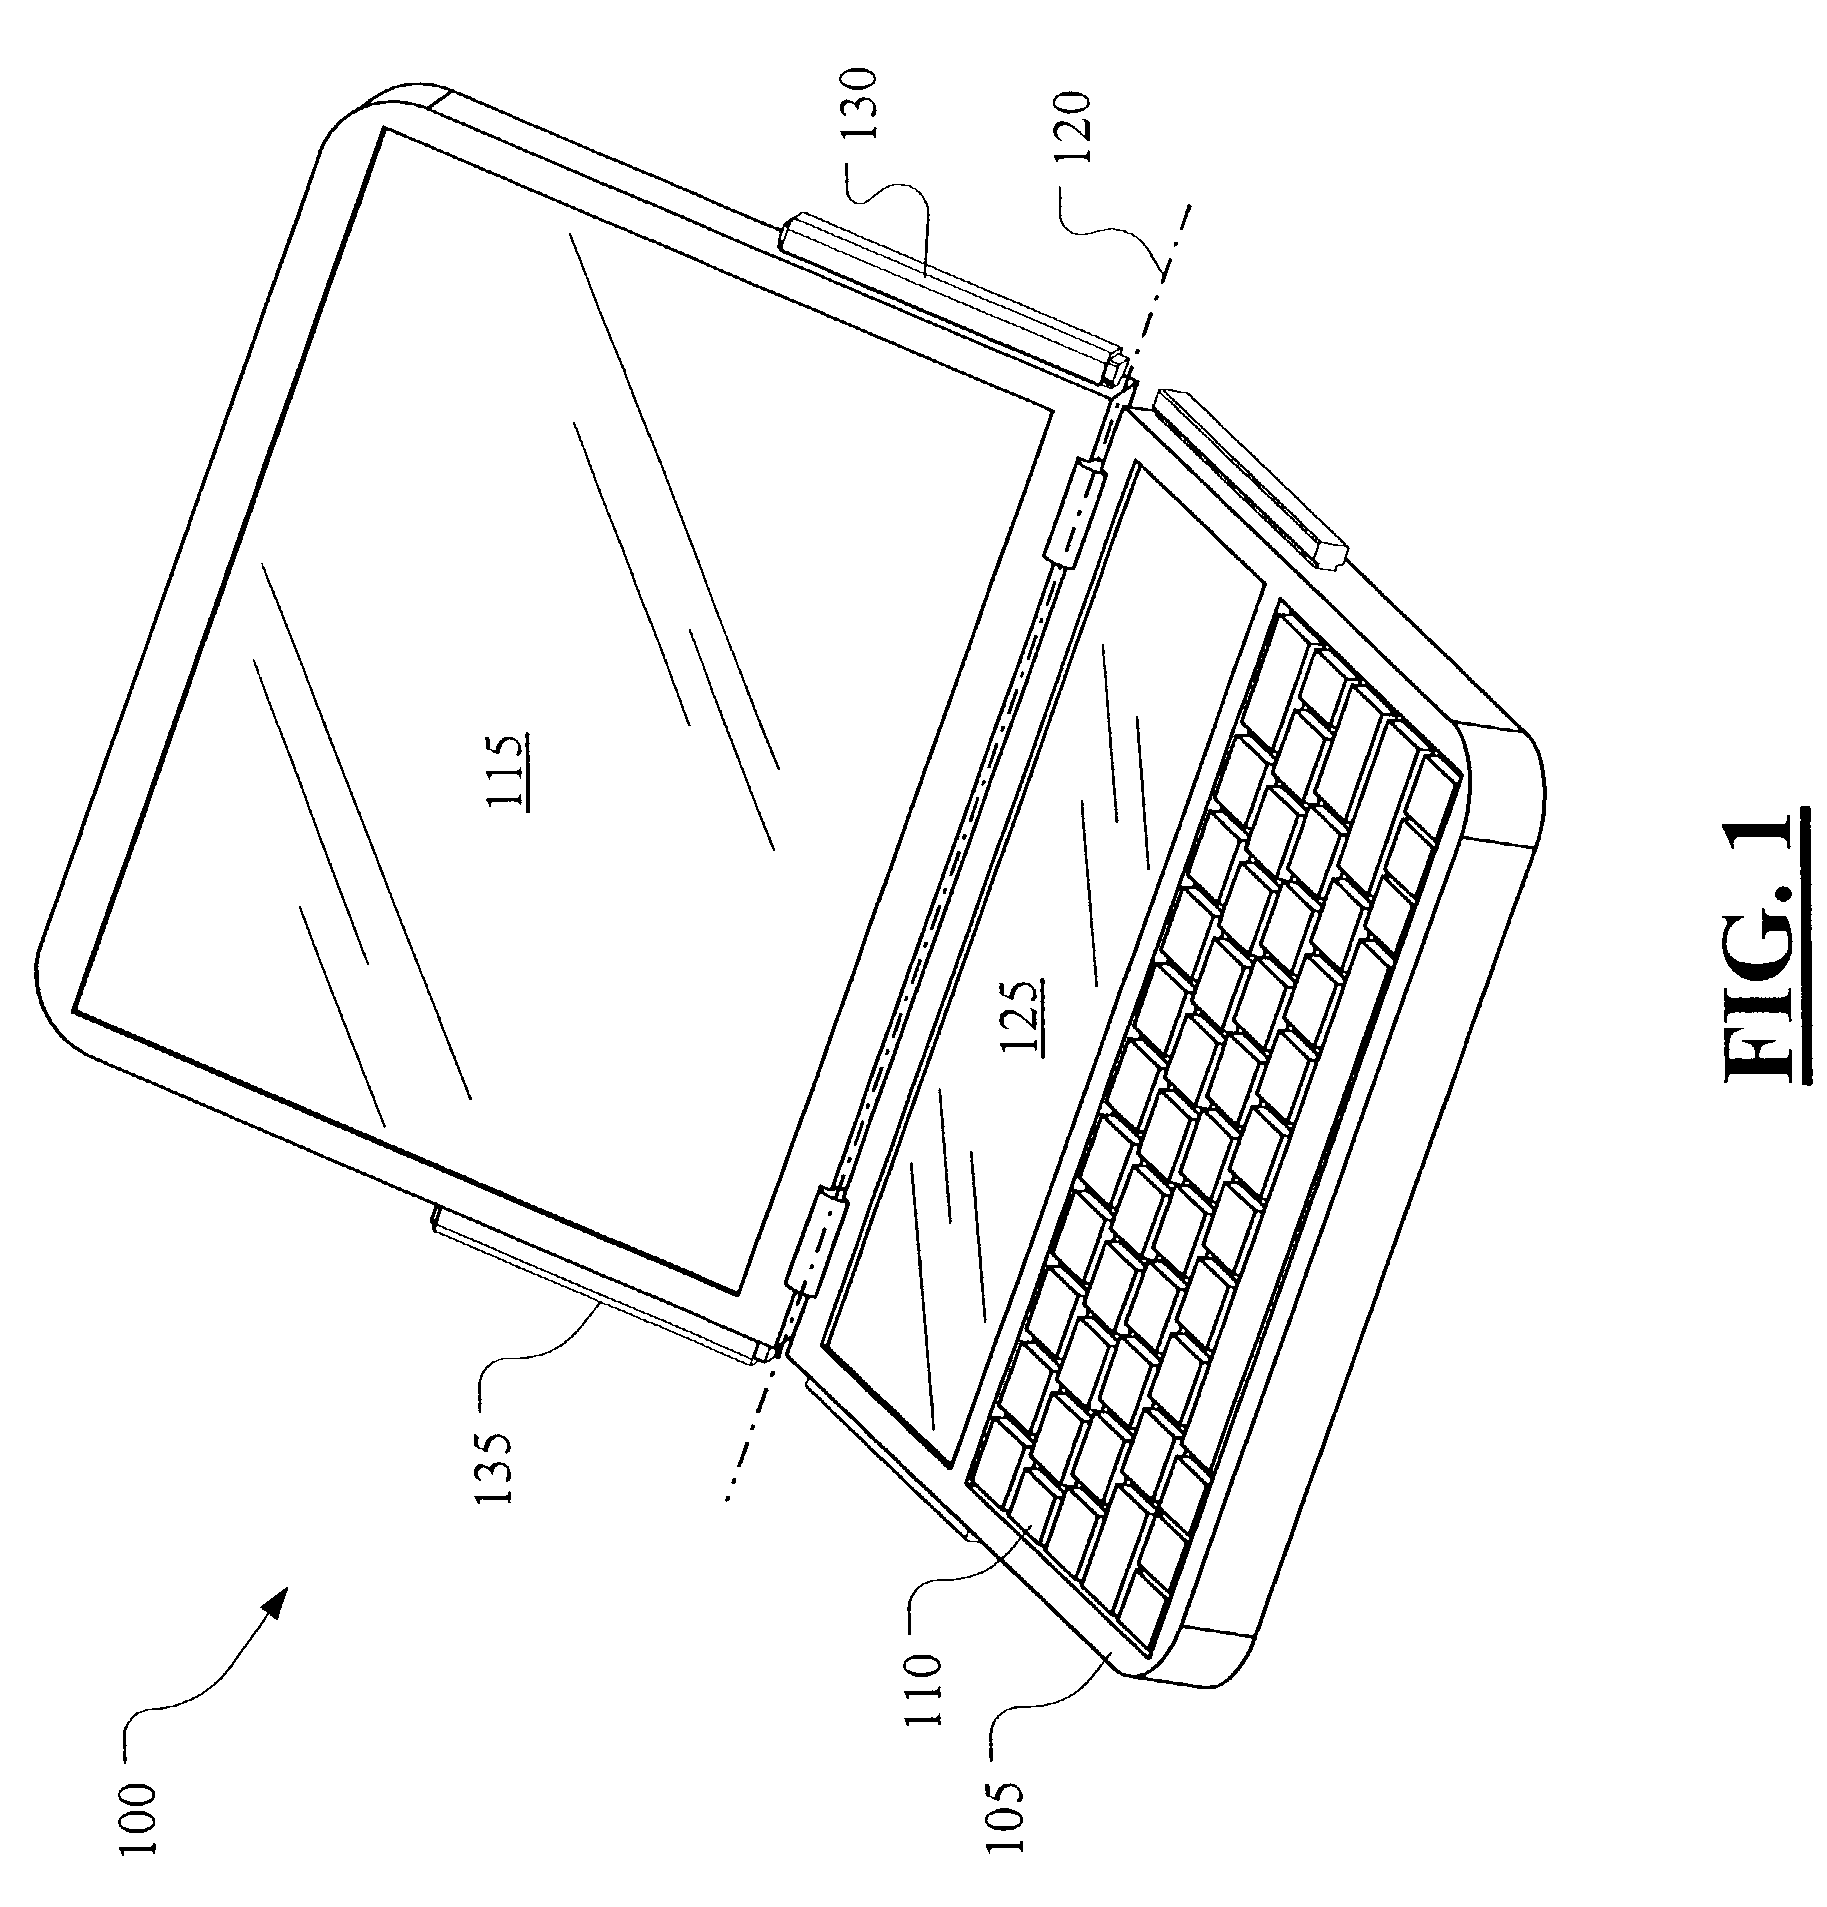 Folding terminal with slider to fix terminal in a flat unfolded configuration